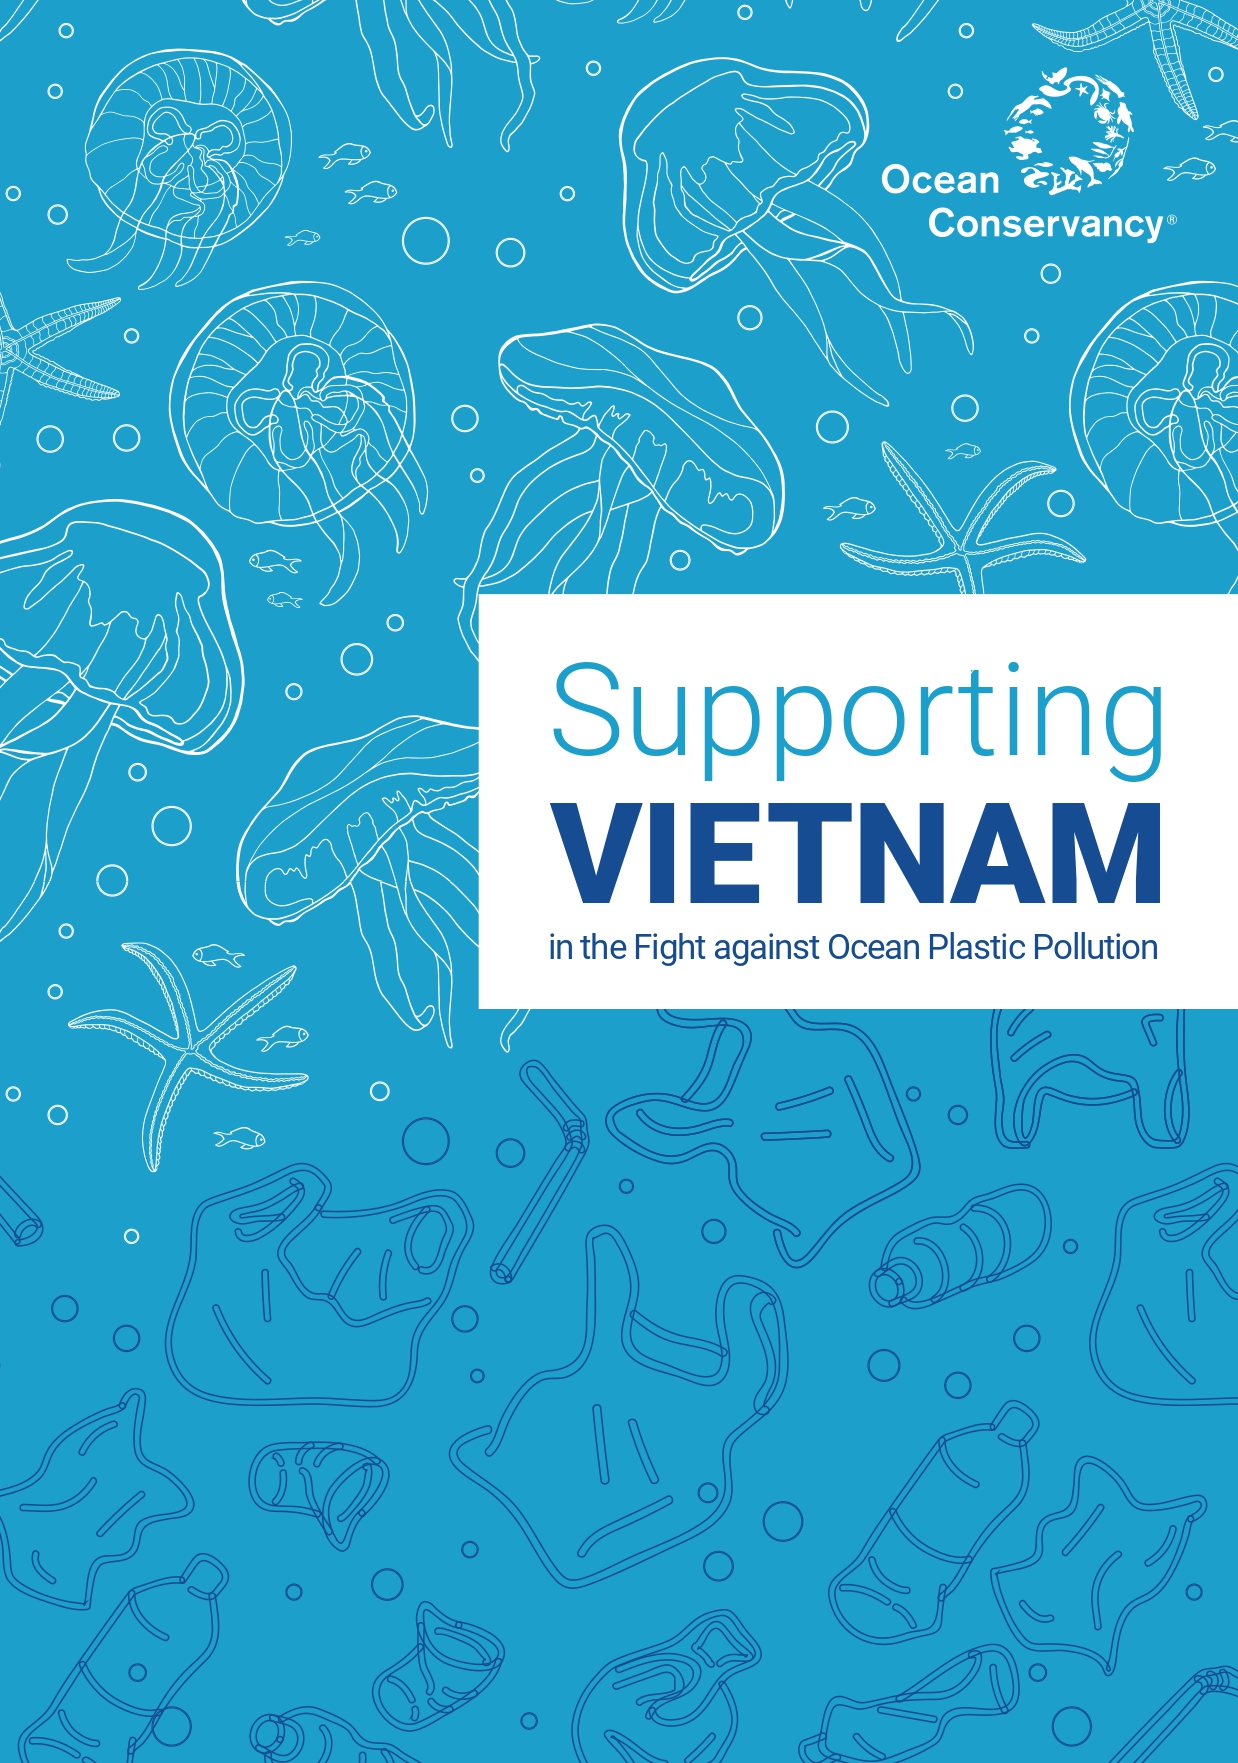 Supporting Vietnam in the Fight against Ocean Plastic Pollution - February 2021